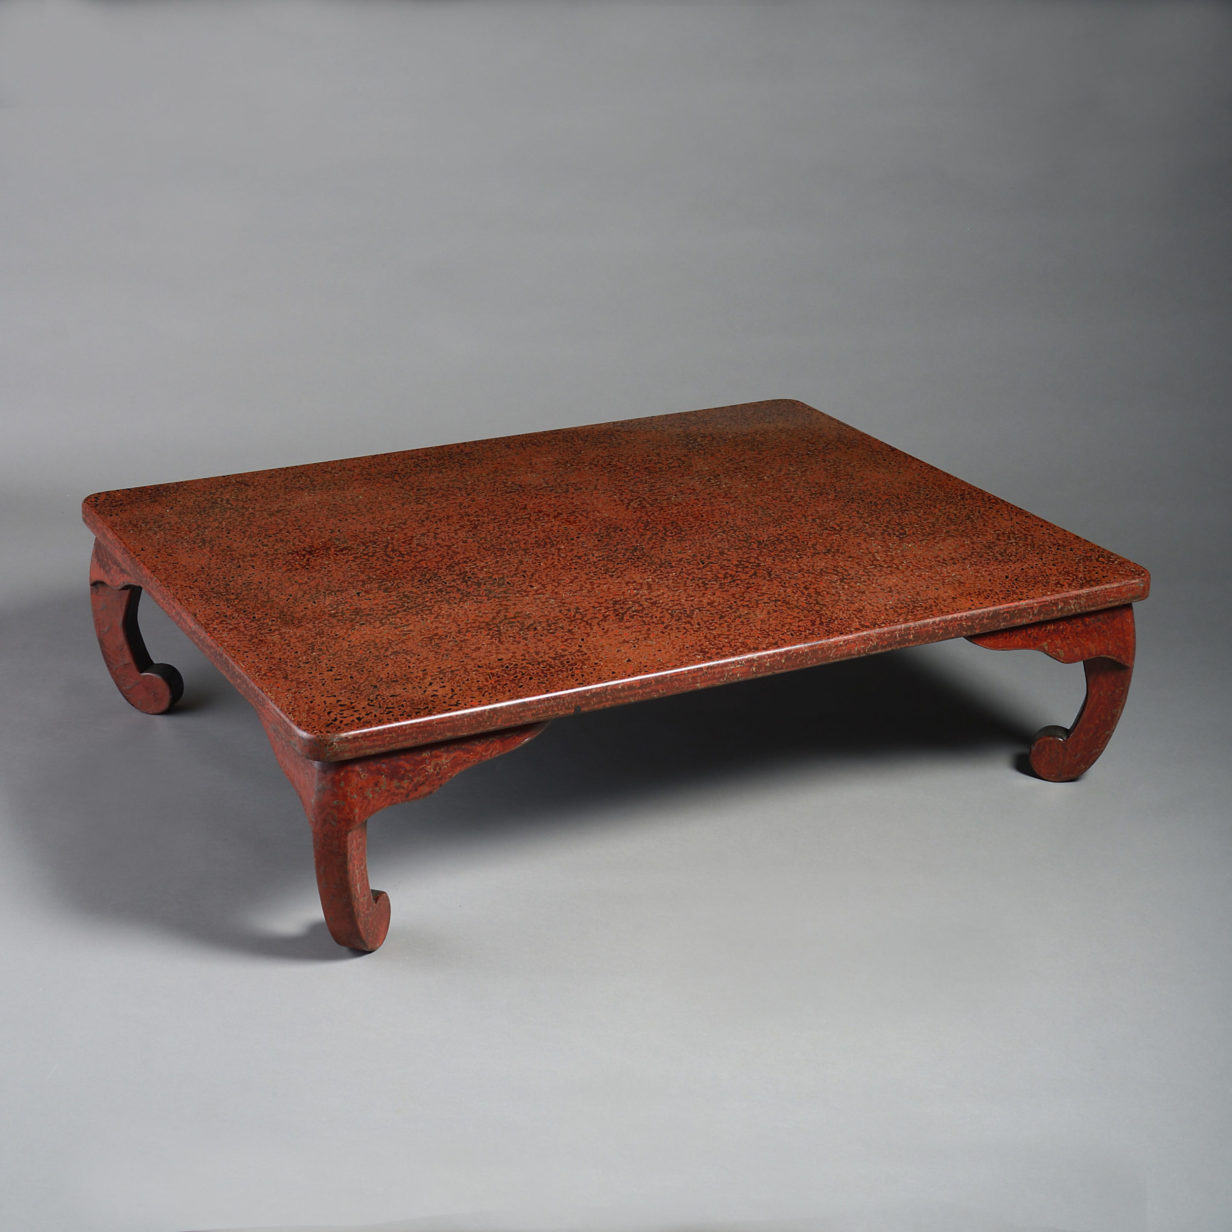 A 20th century wakasa-nuri red lacquer low or coffee table